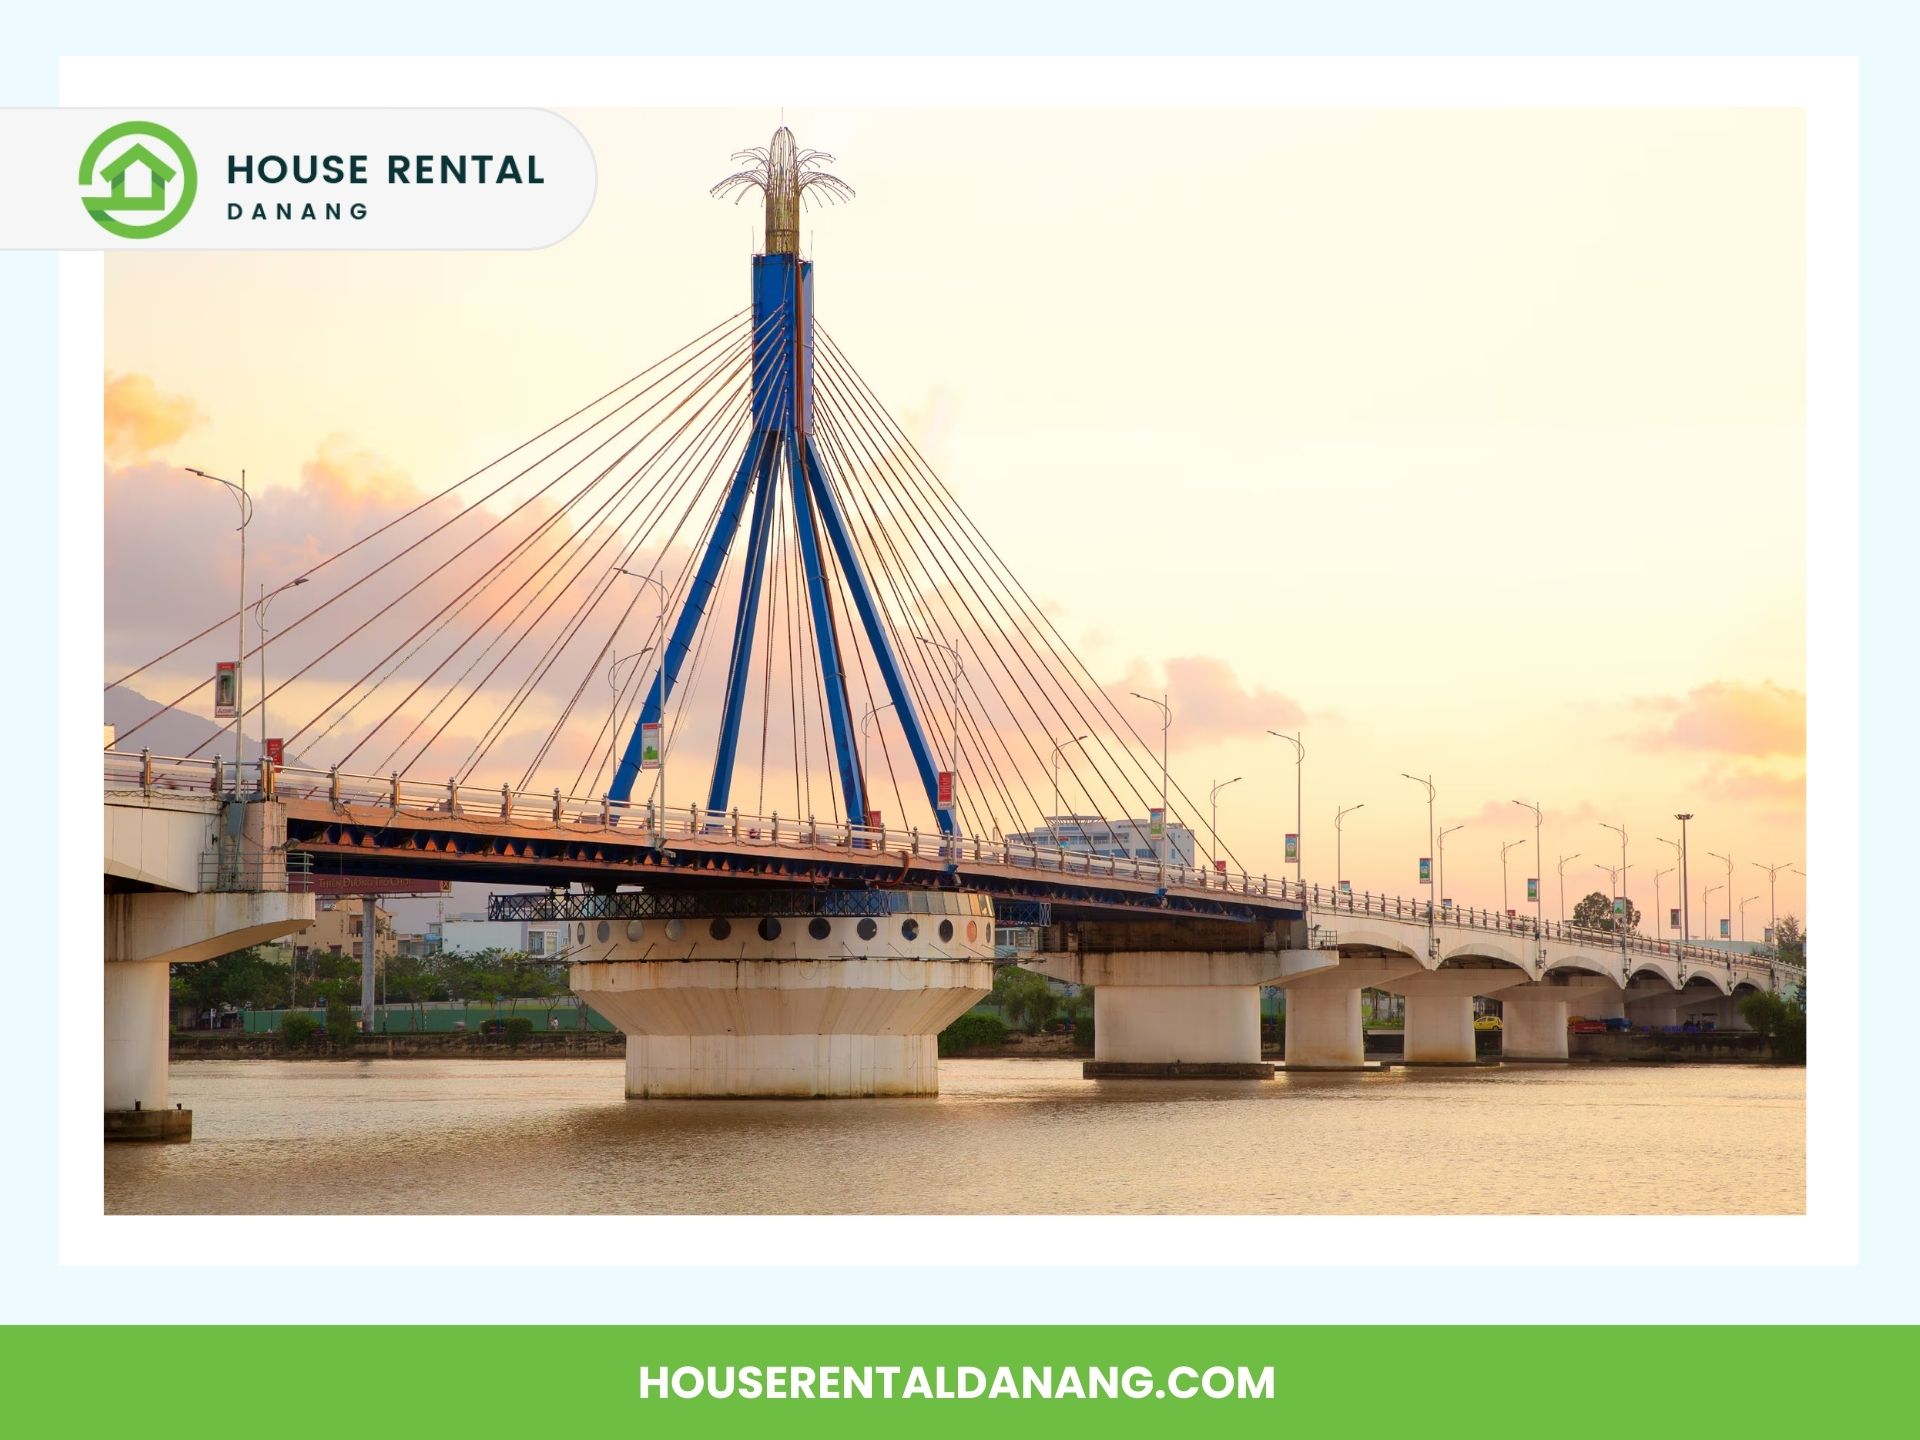 A suspension bridge spans a calm river at sunset, connecting two land areas with visible light posts along its structure. The Han River Bridge is beautifully illuminated. The image is framed with a logo and website address for House Rental Danang.